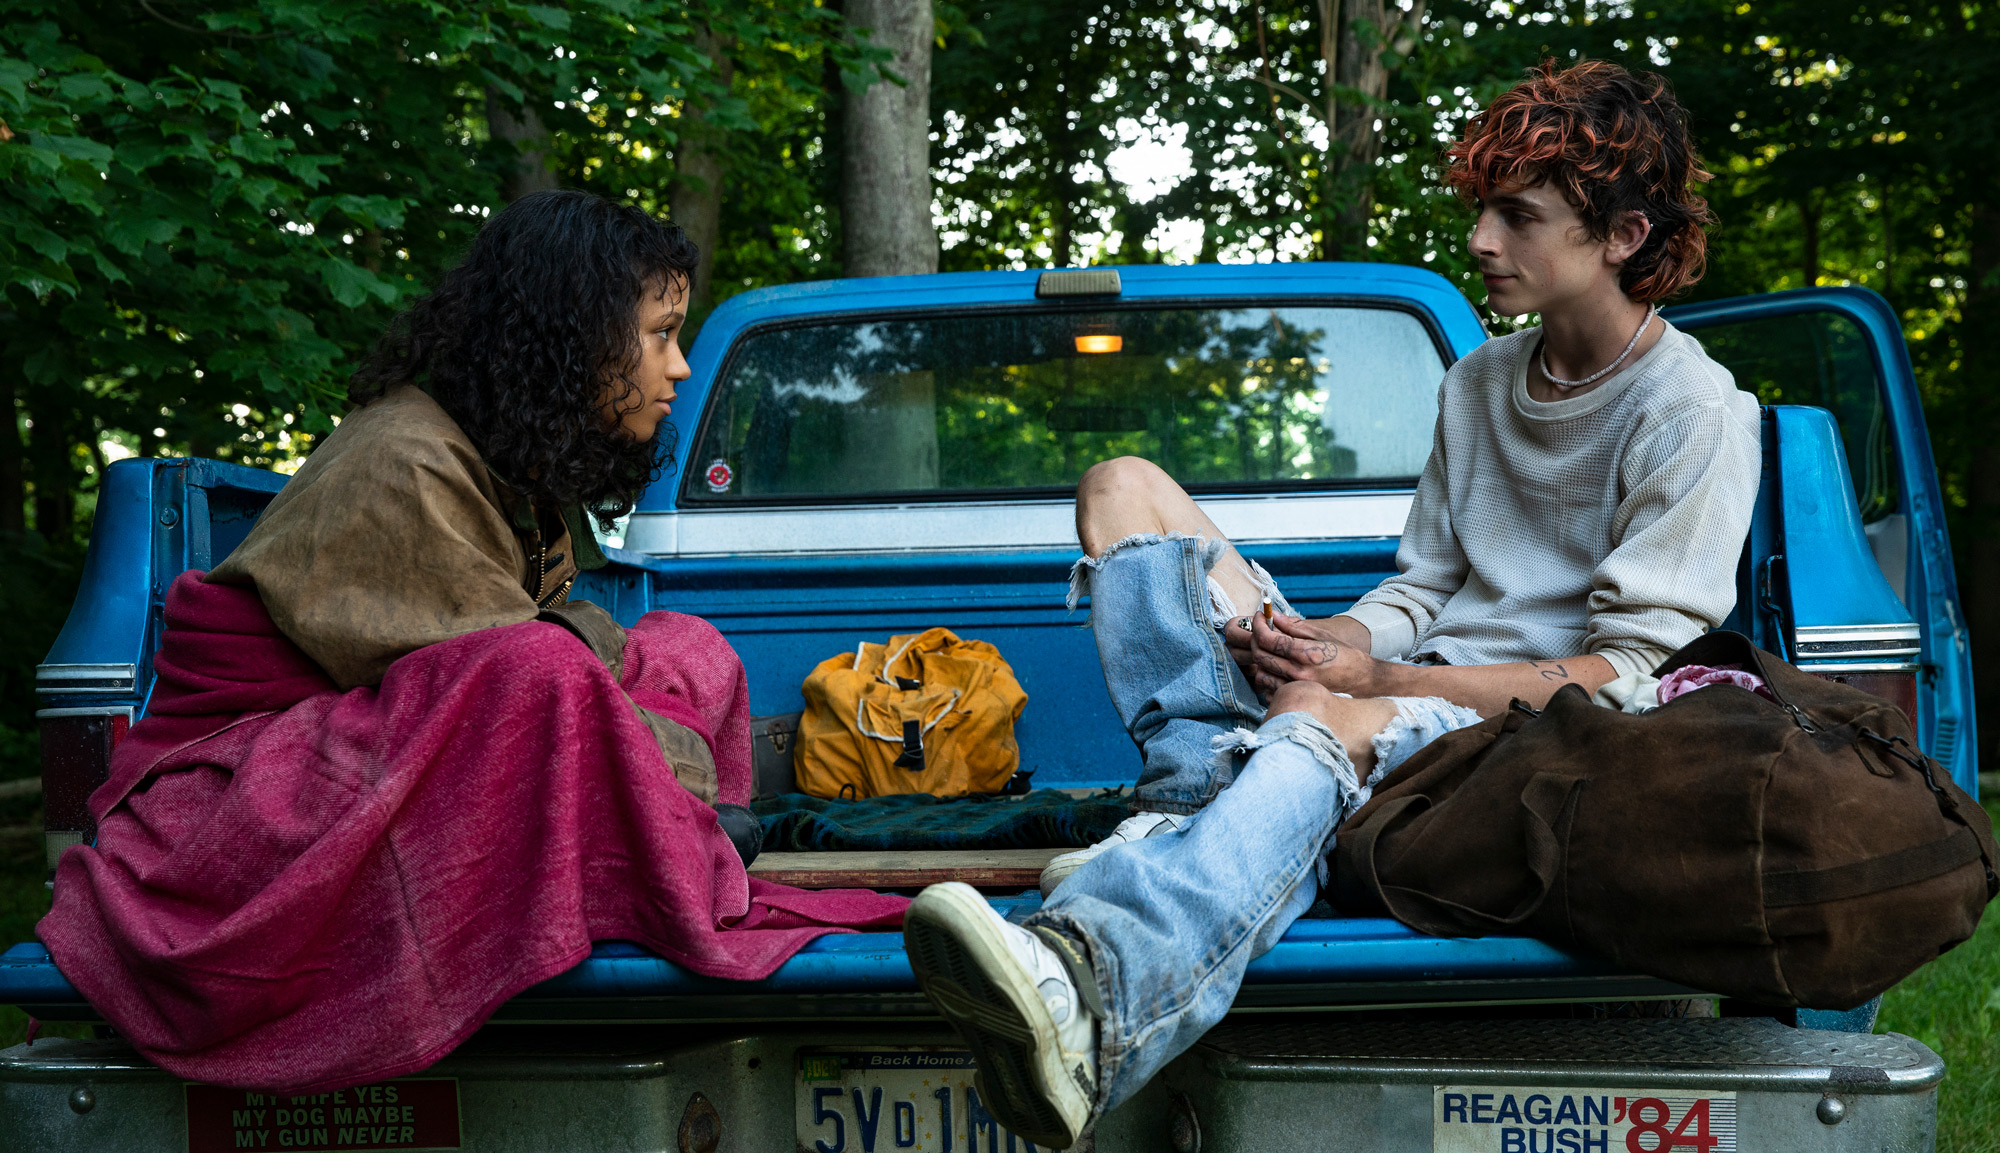 Timothée Chalamet and Taylor Russell in "Bones and All"